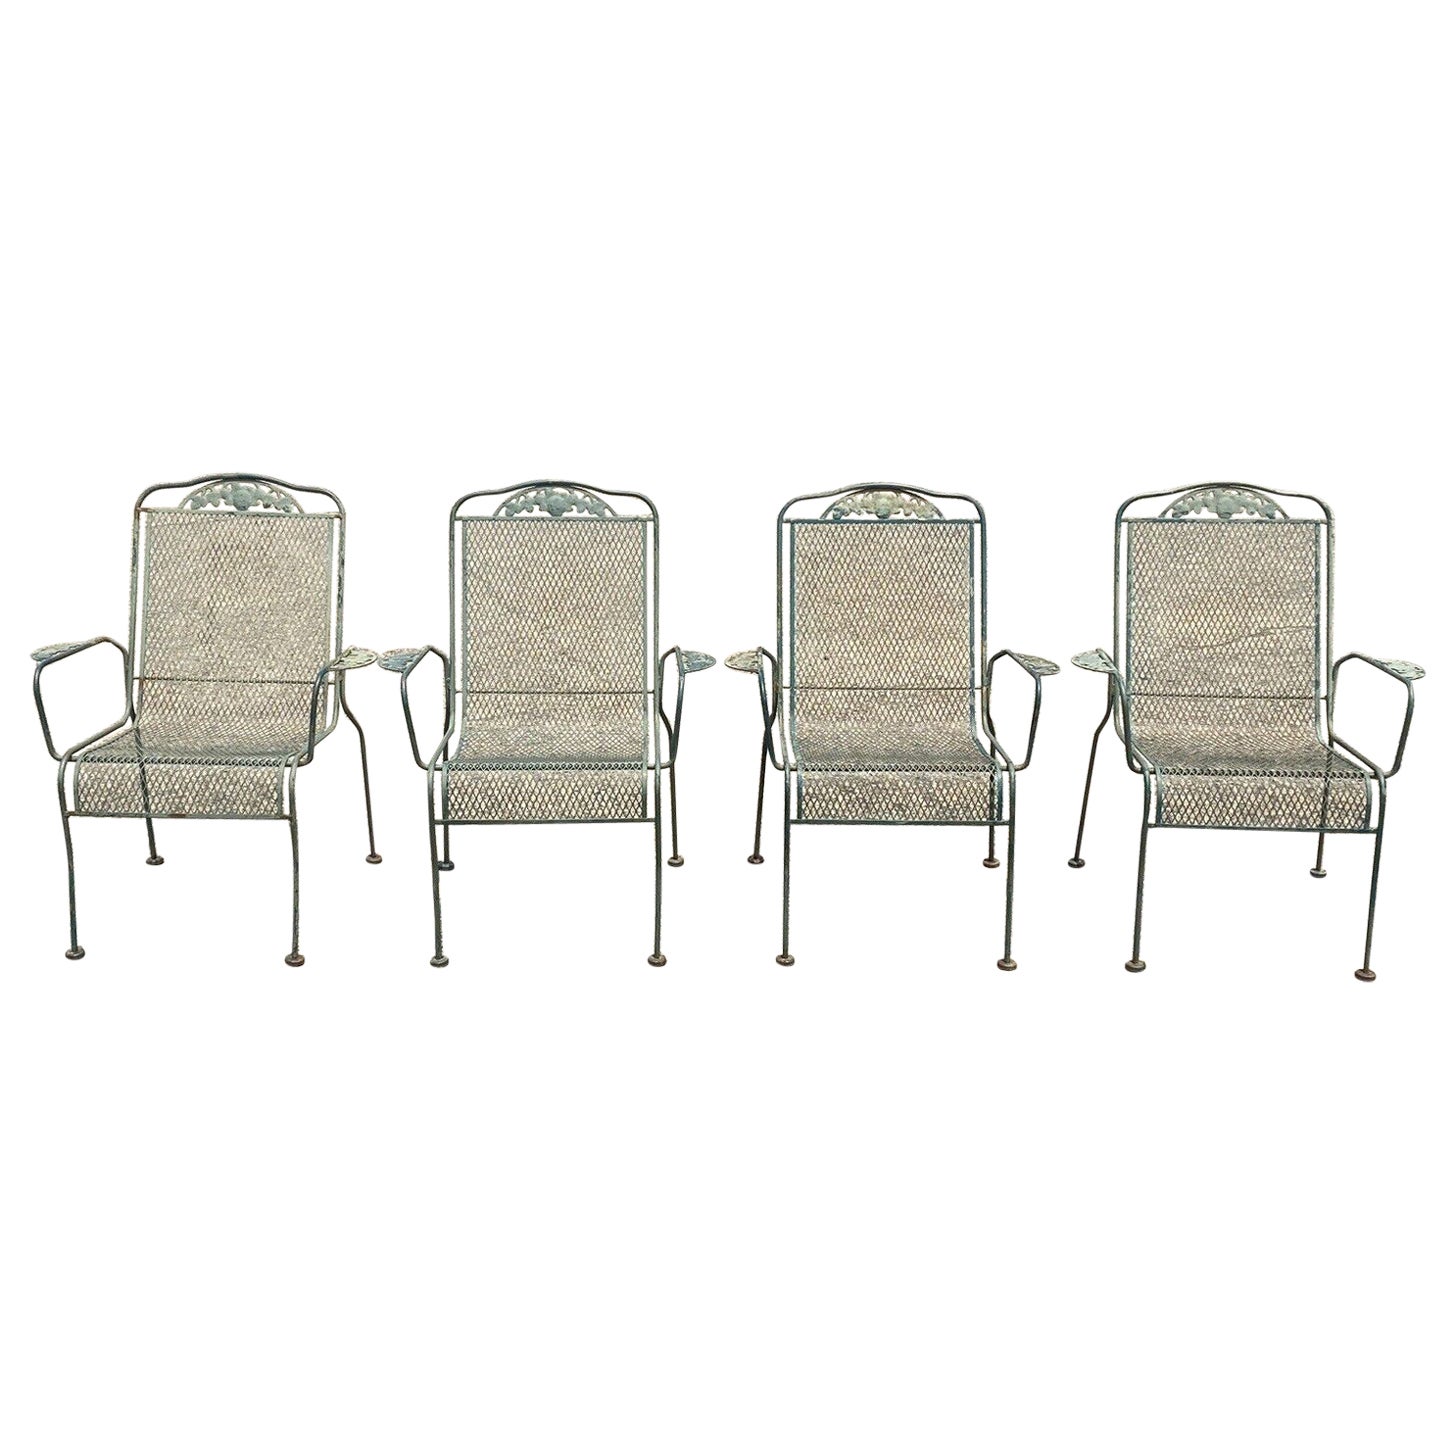 Vintage Meadowcraft Dogwood Green Wrought Iron Outdoor Patio Chairs, Set of 4